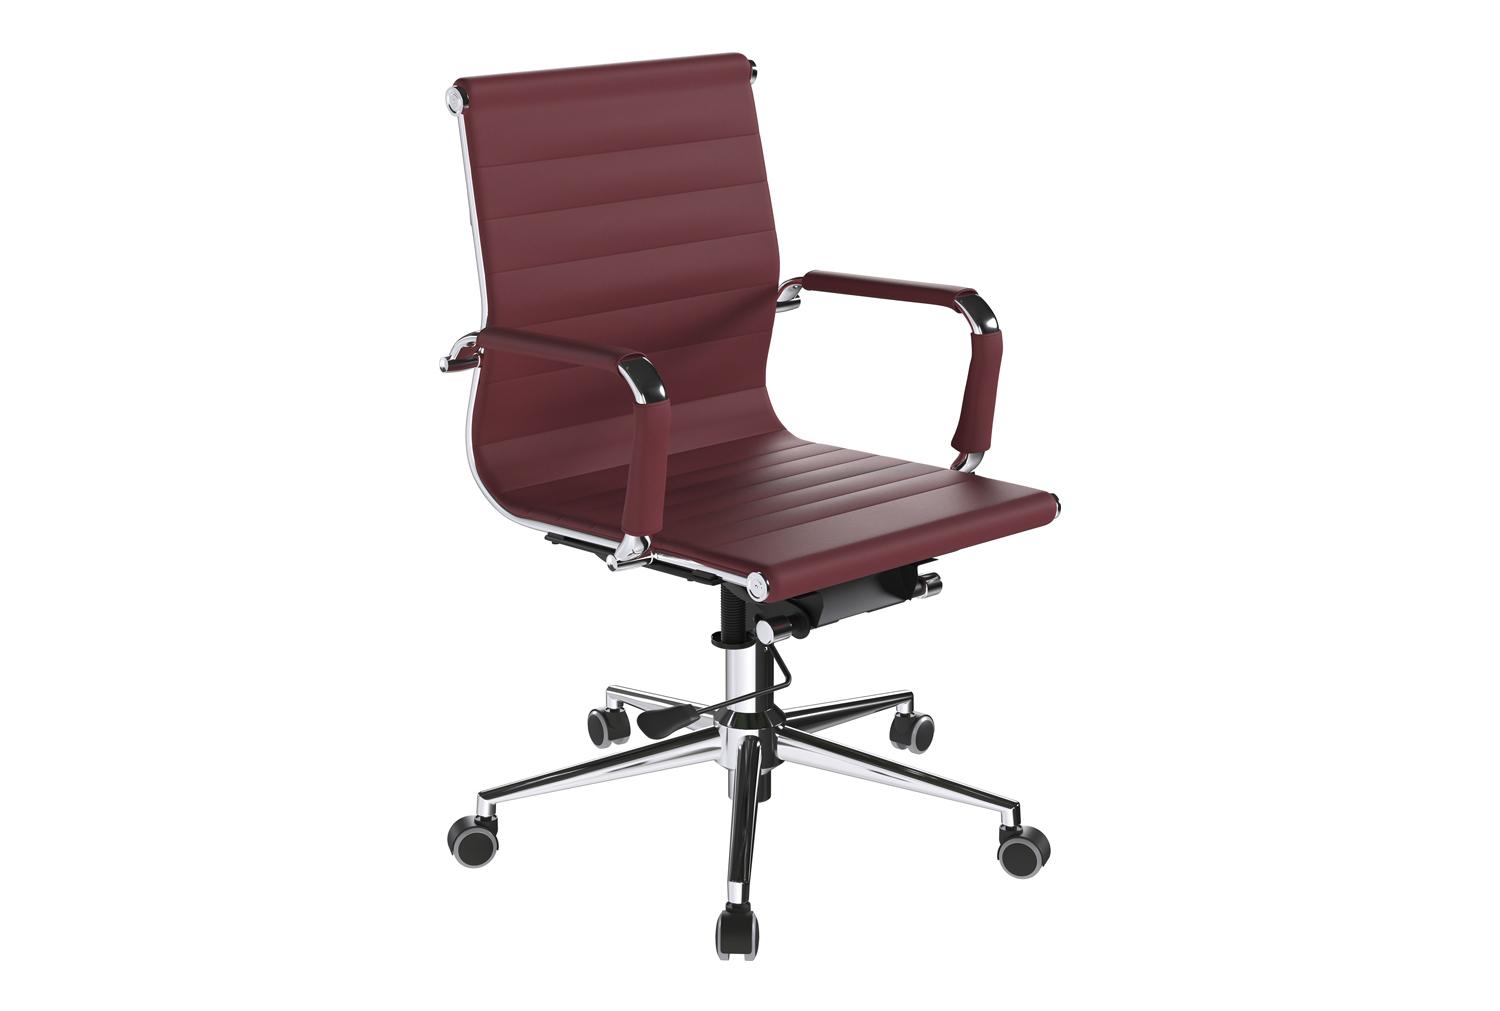 Andruzzi Medium Back Bonded Leather Executive Chair (Ox Blood)